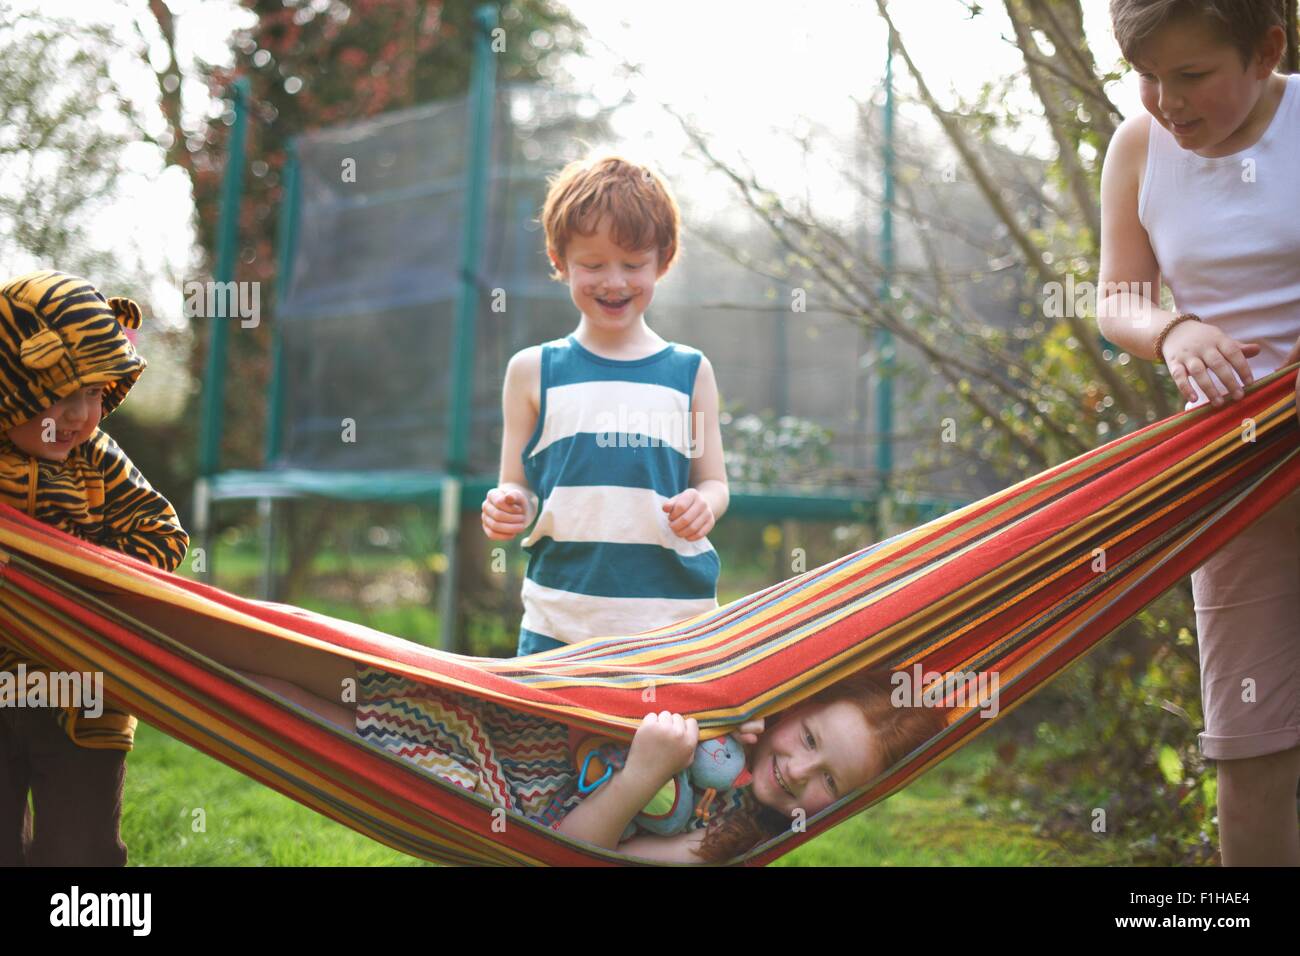 Young children playing in garden Stock Photo